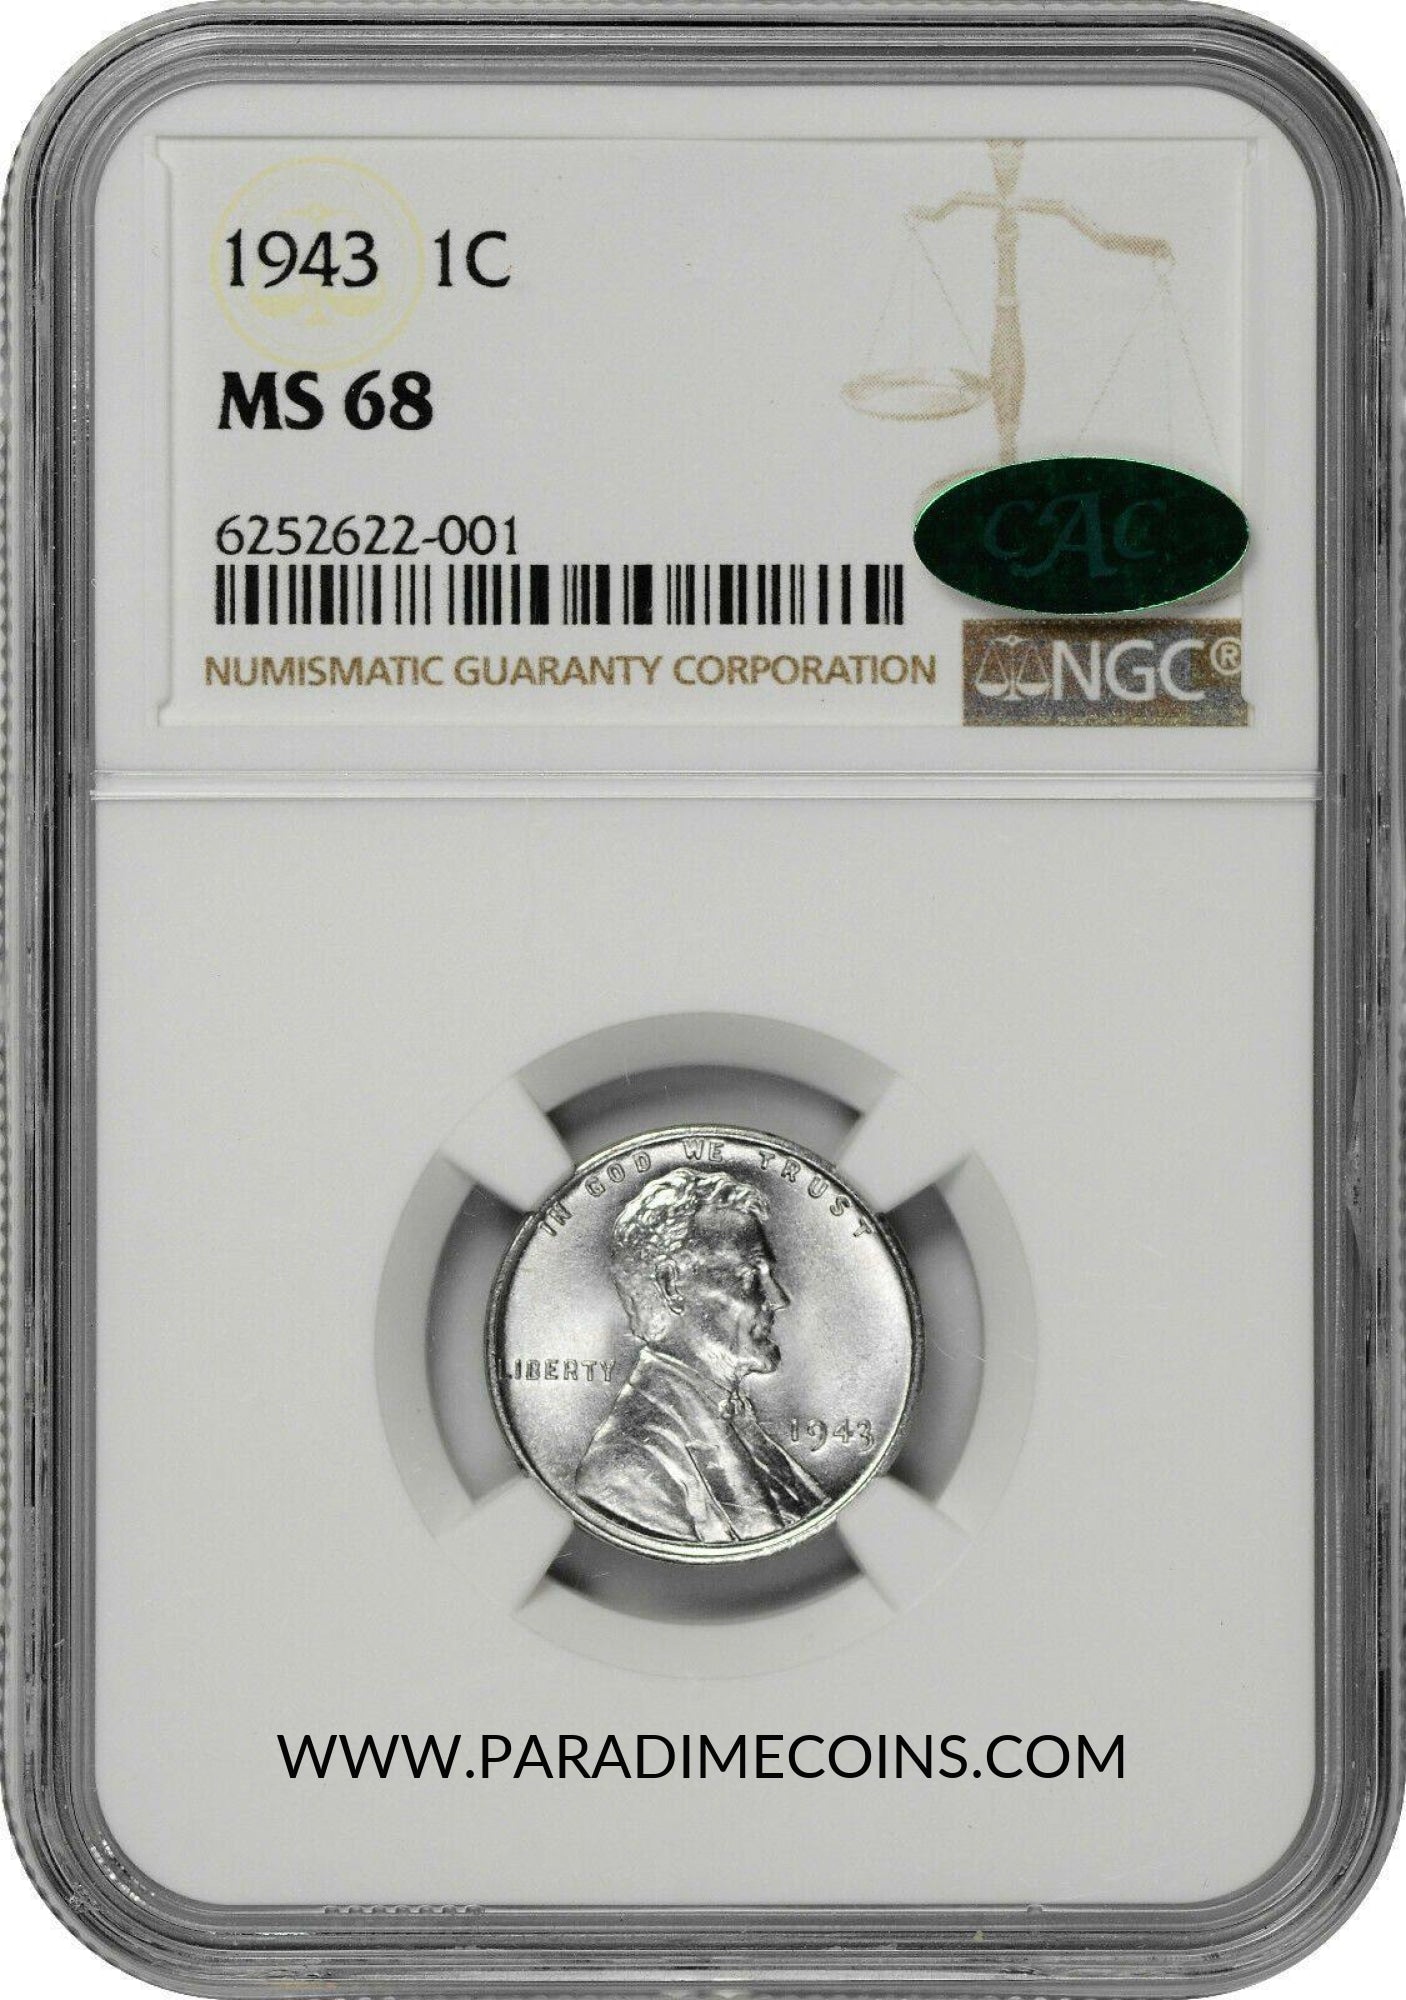 1943 1C STEEL MS68 NGC CAC - Paradime Coins | PCGS NGC CACG CAC Rare US Numismatic Coins For Sale